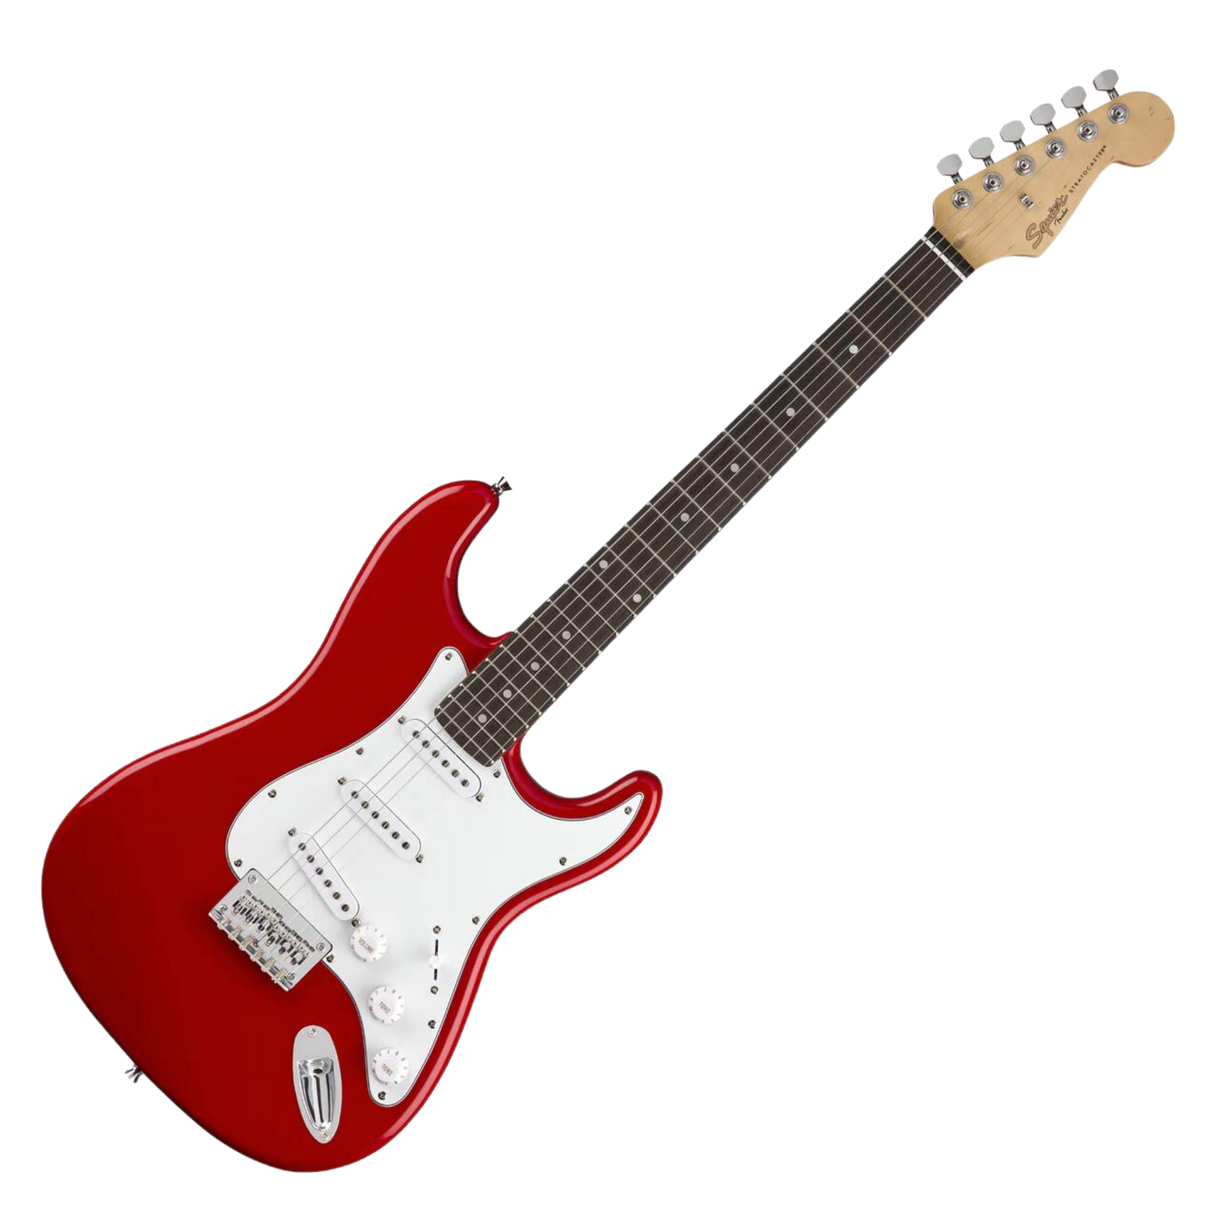 SQUIER by Fender Stratocaster Hard Tail Solid-body Electric Guitar